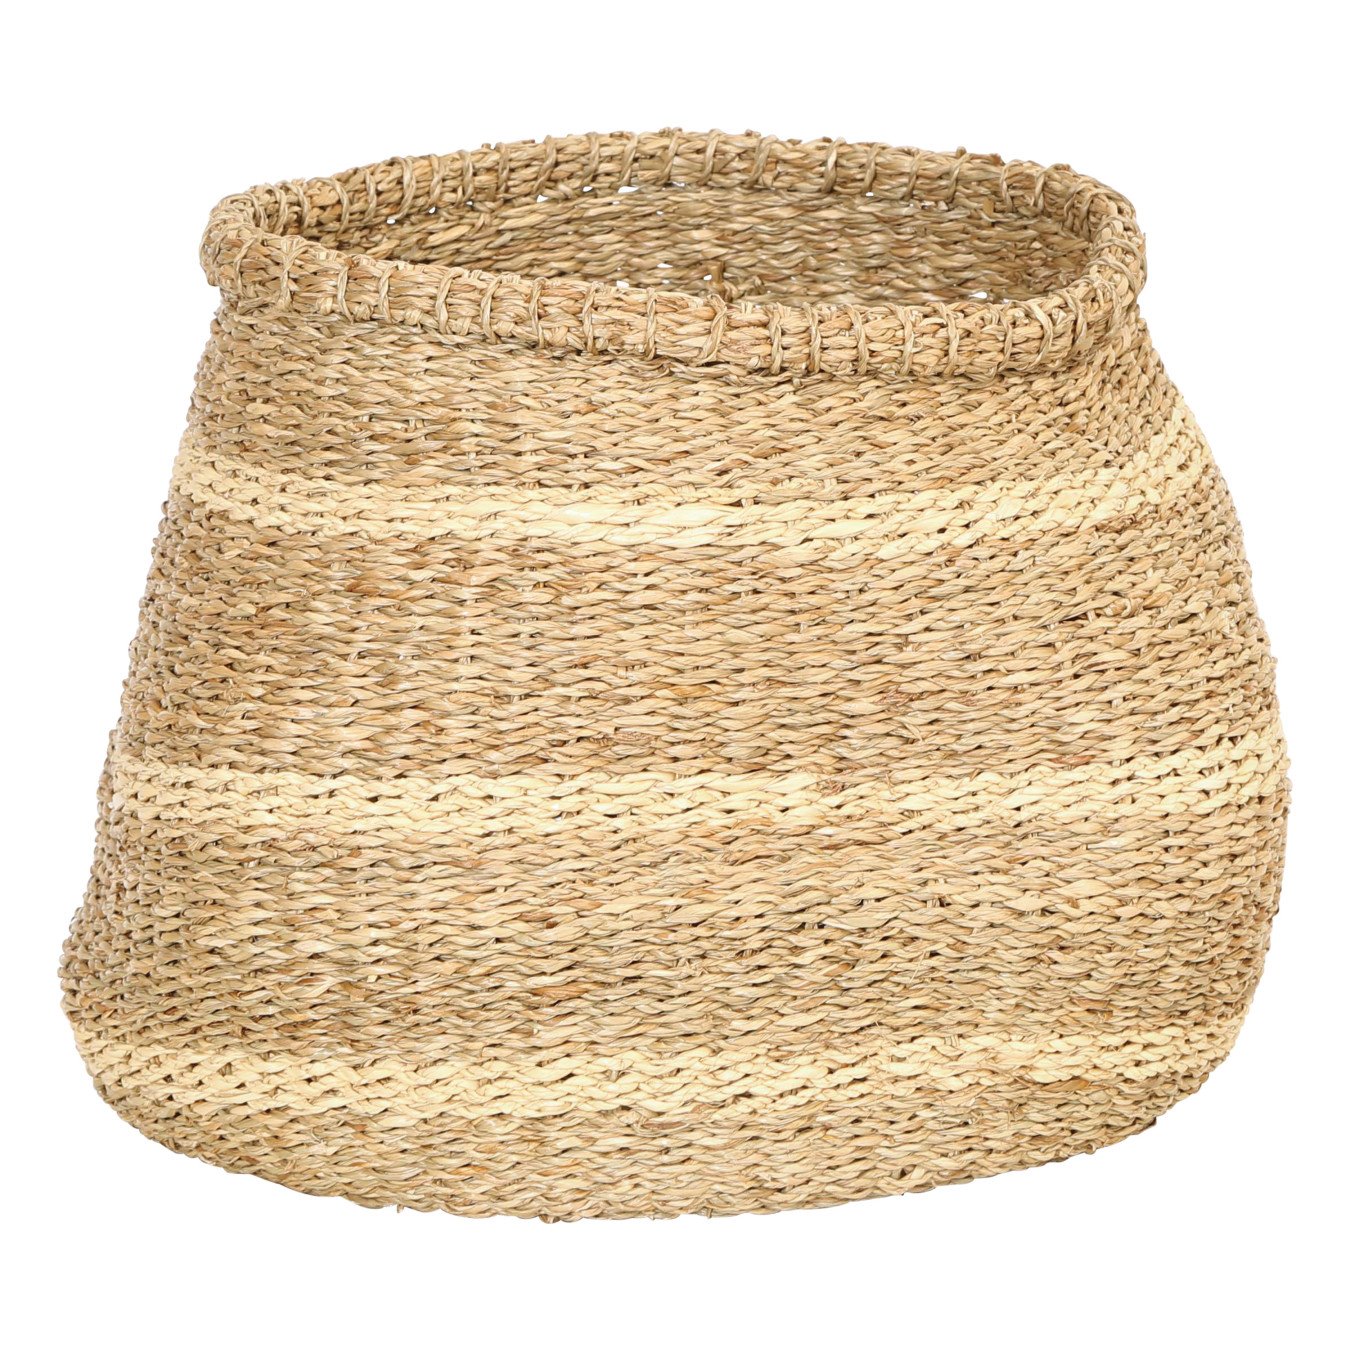 15"R Handwoven Seagrass Basket with Stripes